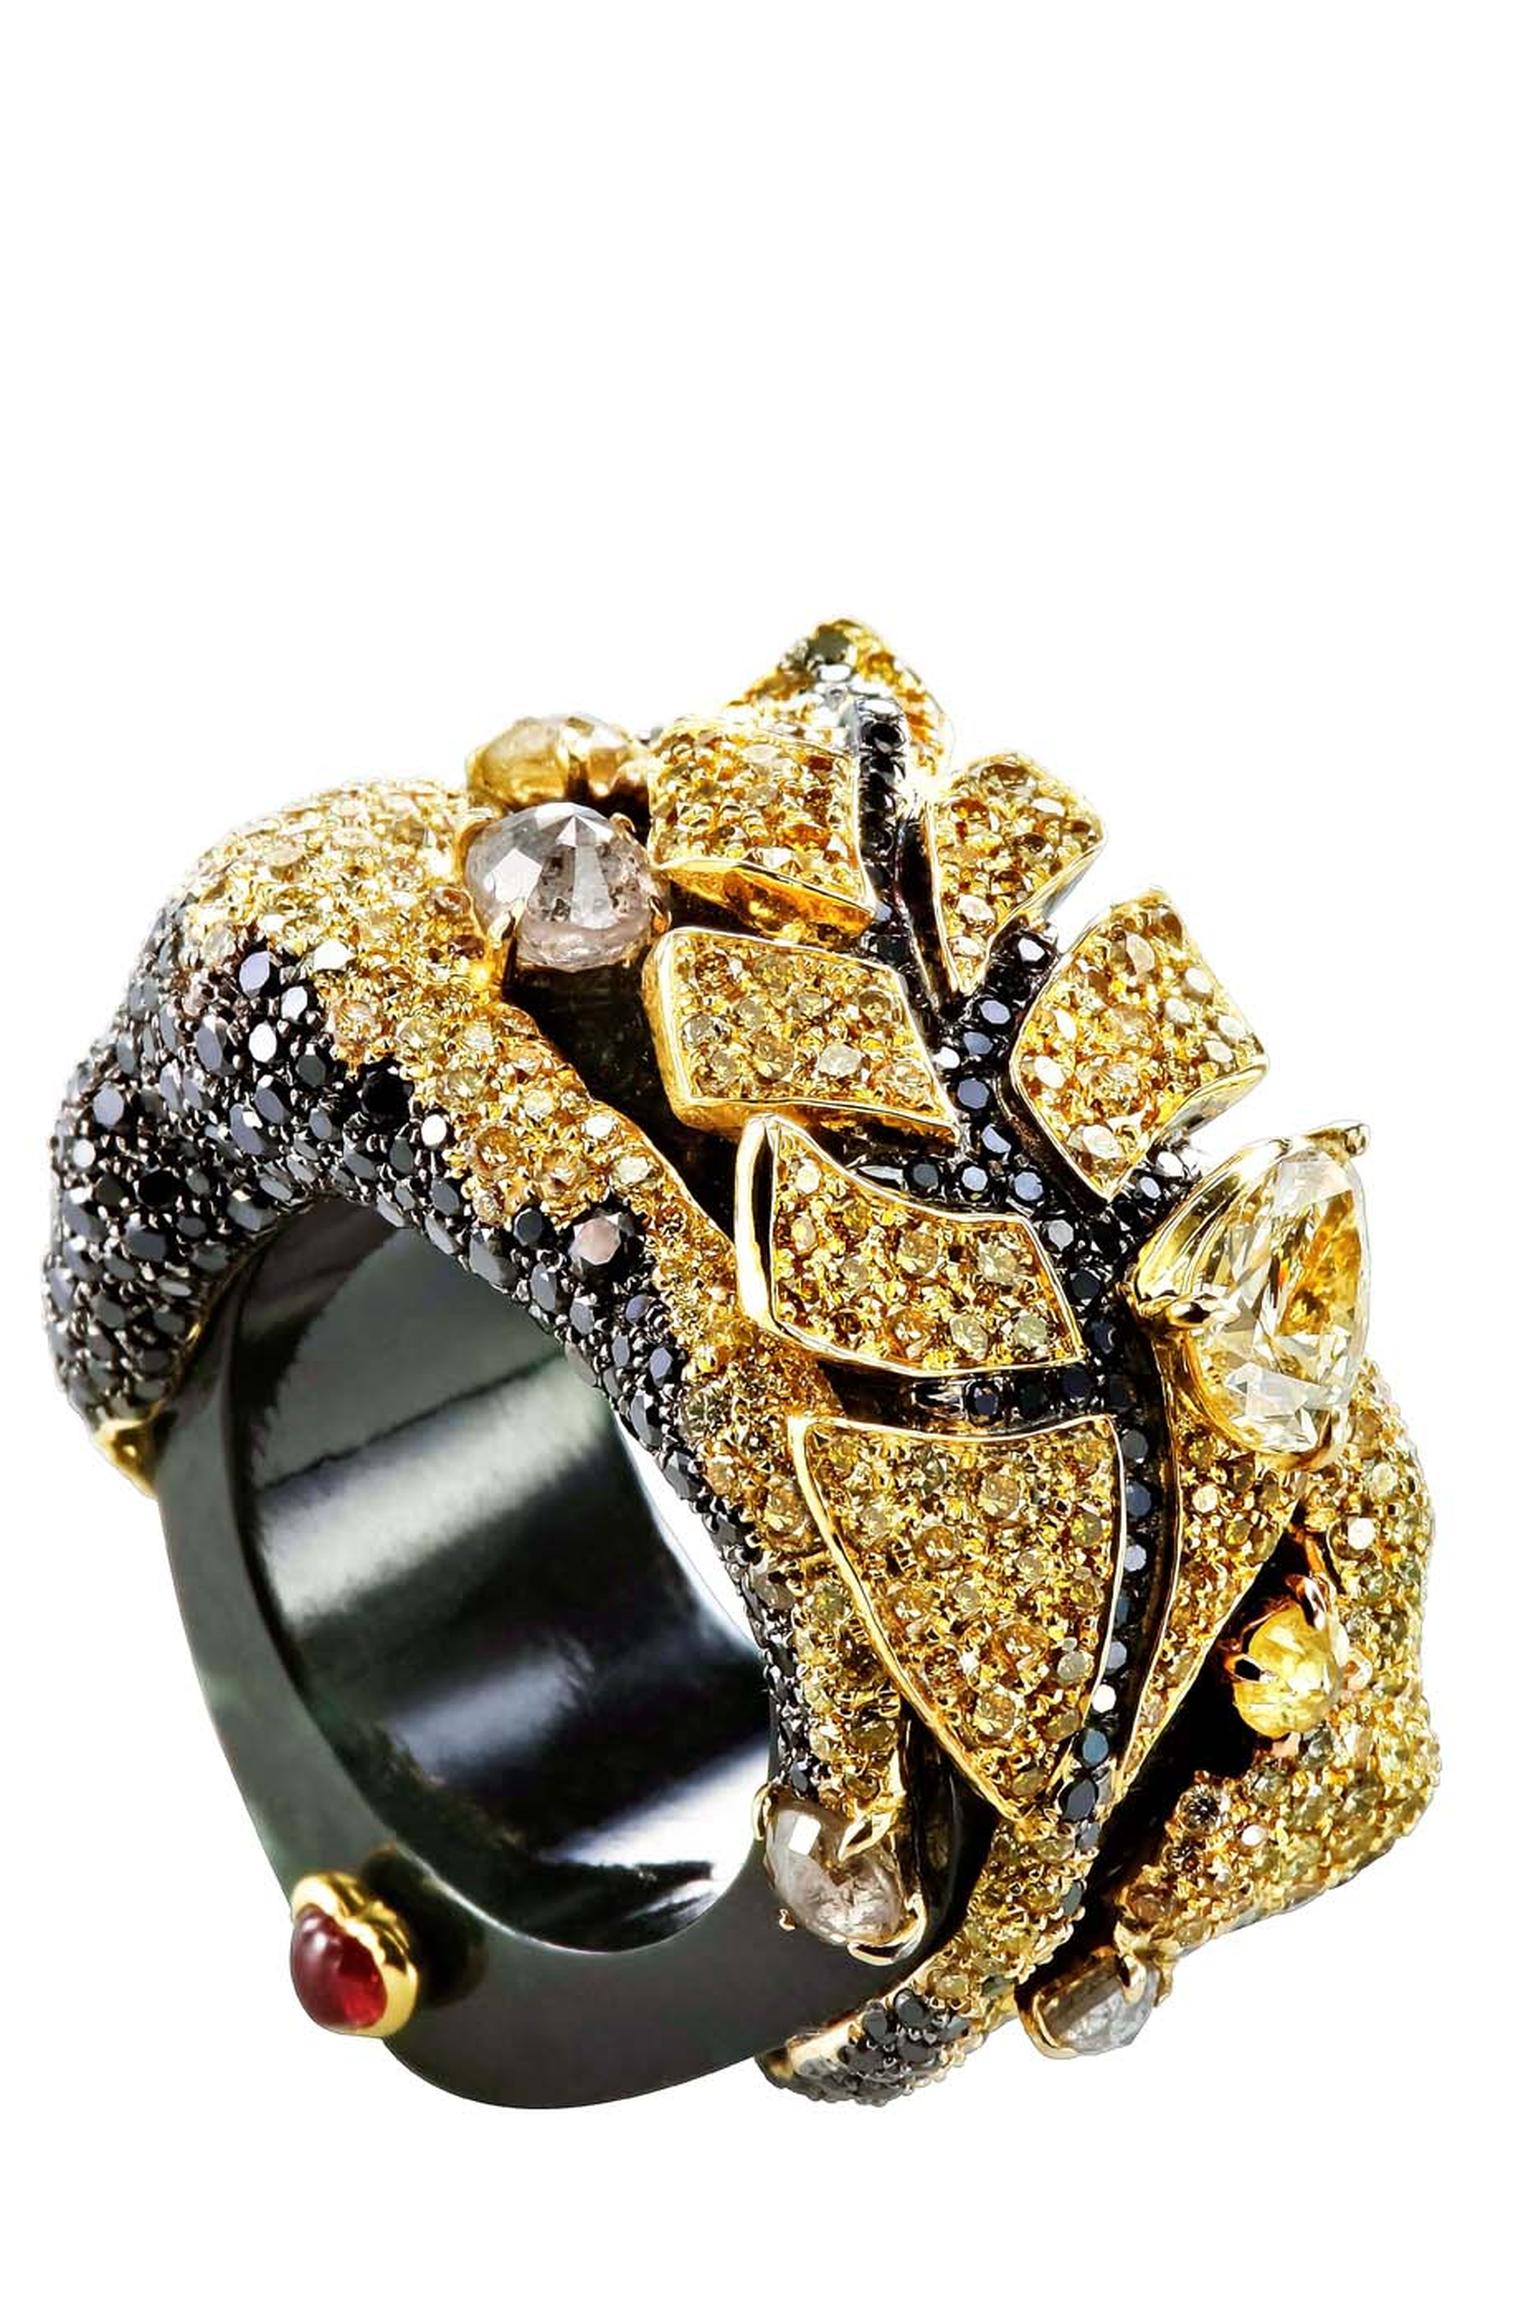 Chara Wen Life collection ring with yellow and black diamonds on a jade black band.